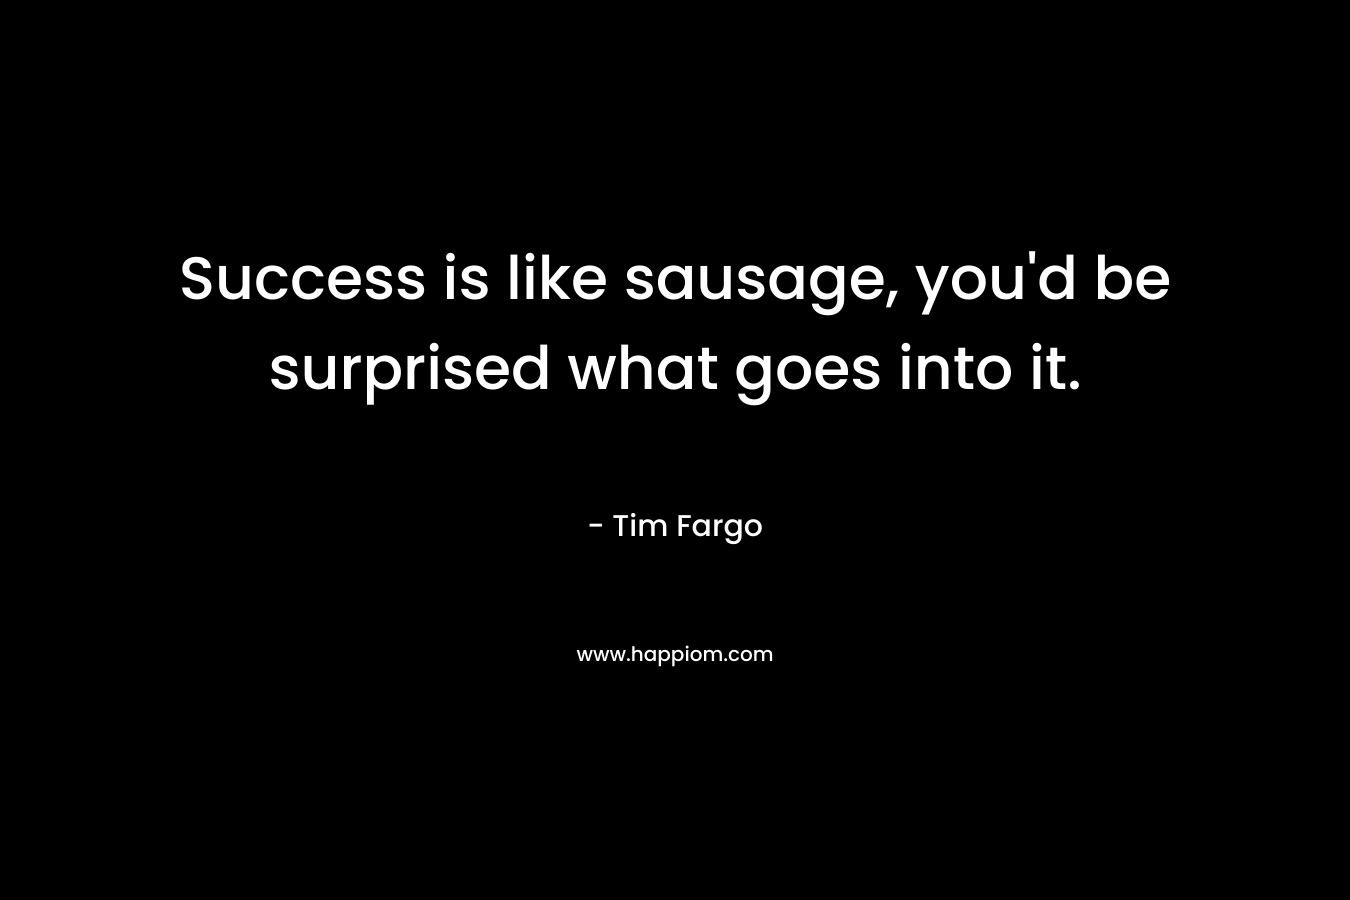 Success is like sausage, you'd be surprised what goes into it.